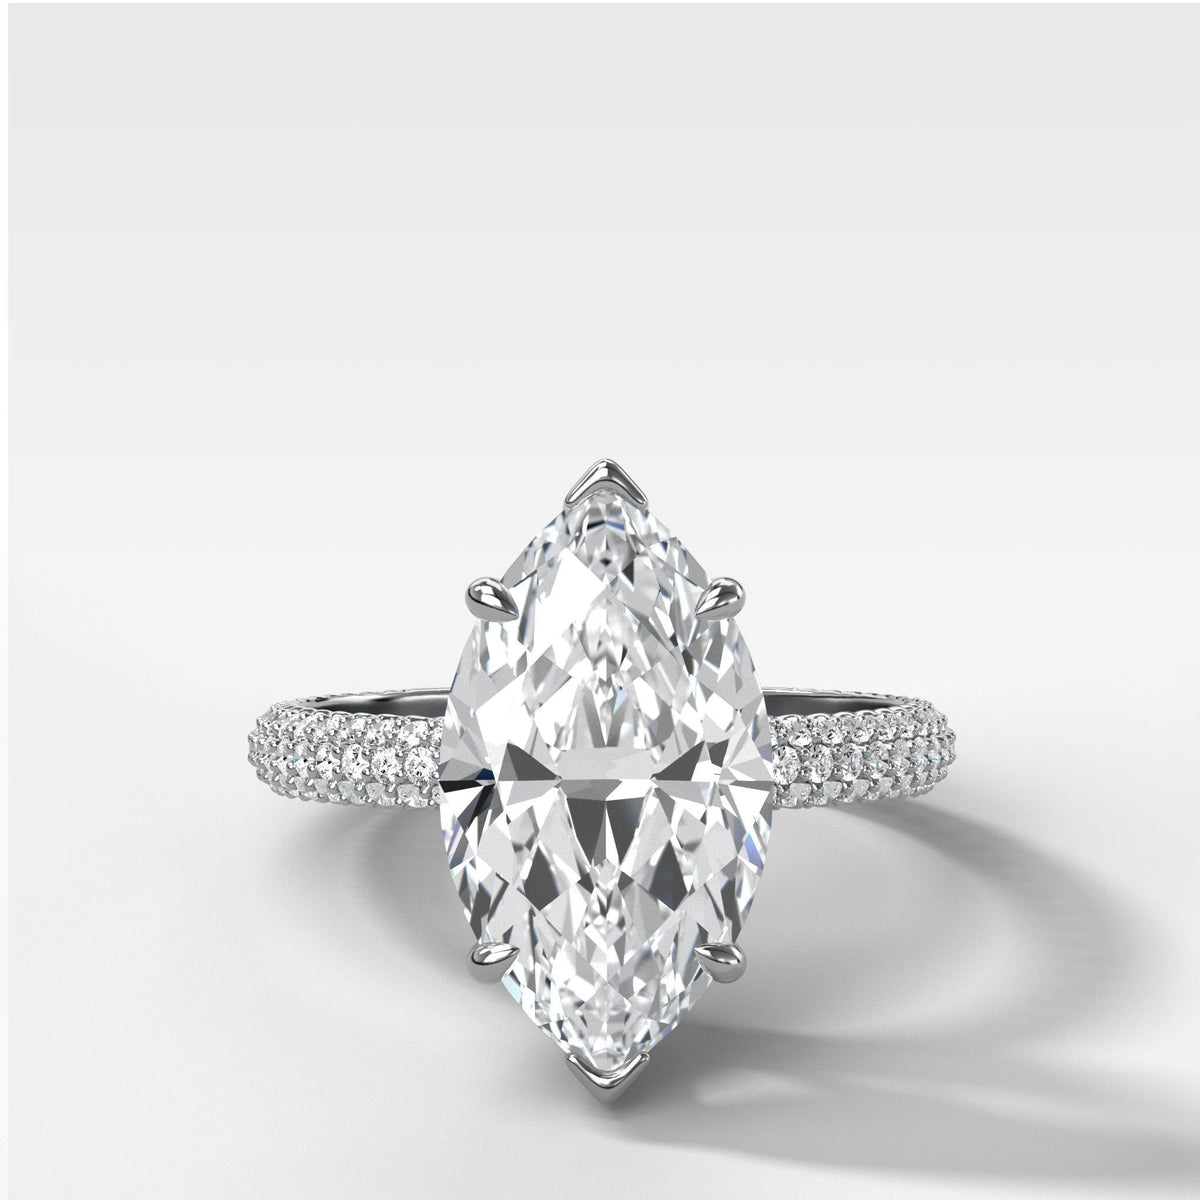 Triple Row Pav≈Ω Engagement Ring With Marquise Cut by Good Stone in White Gold